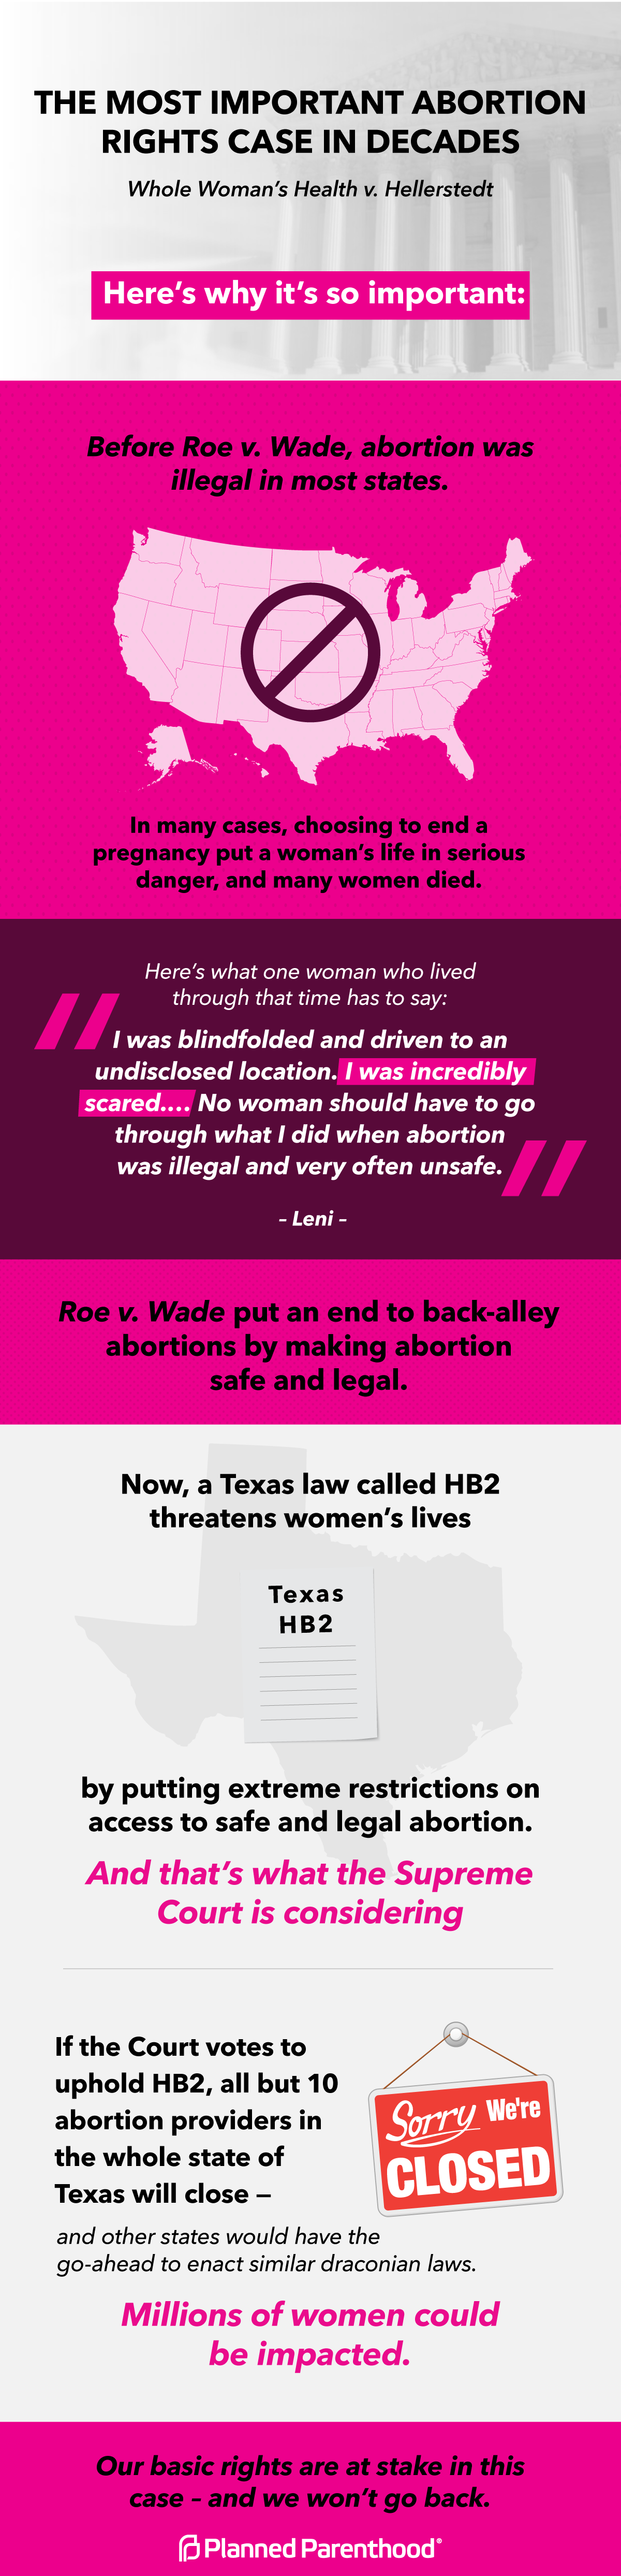 20160609-HB2-SCOTUS-Email-Graphic-FINAL.png